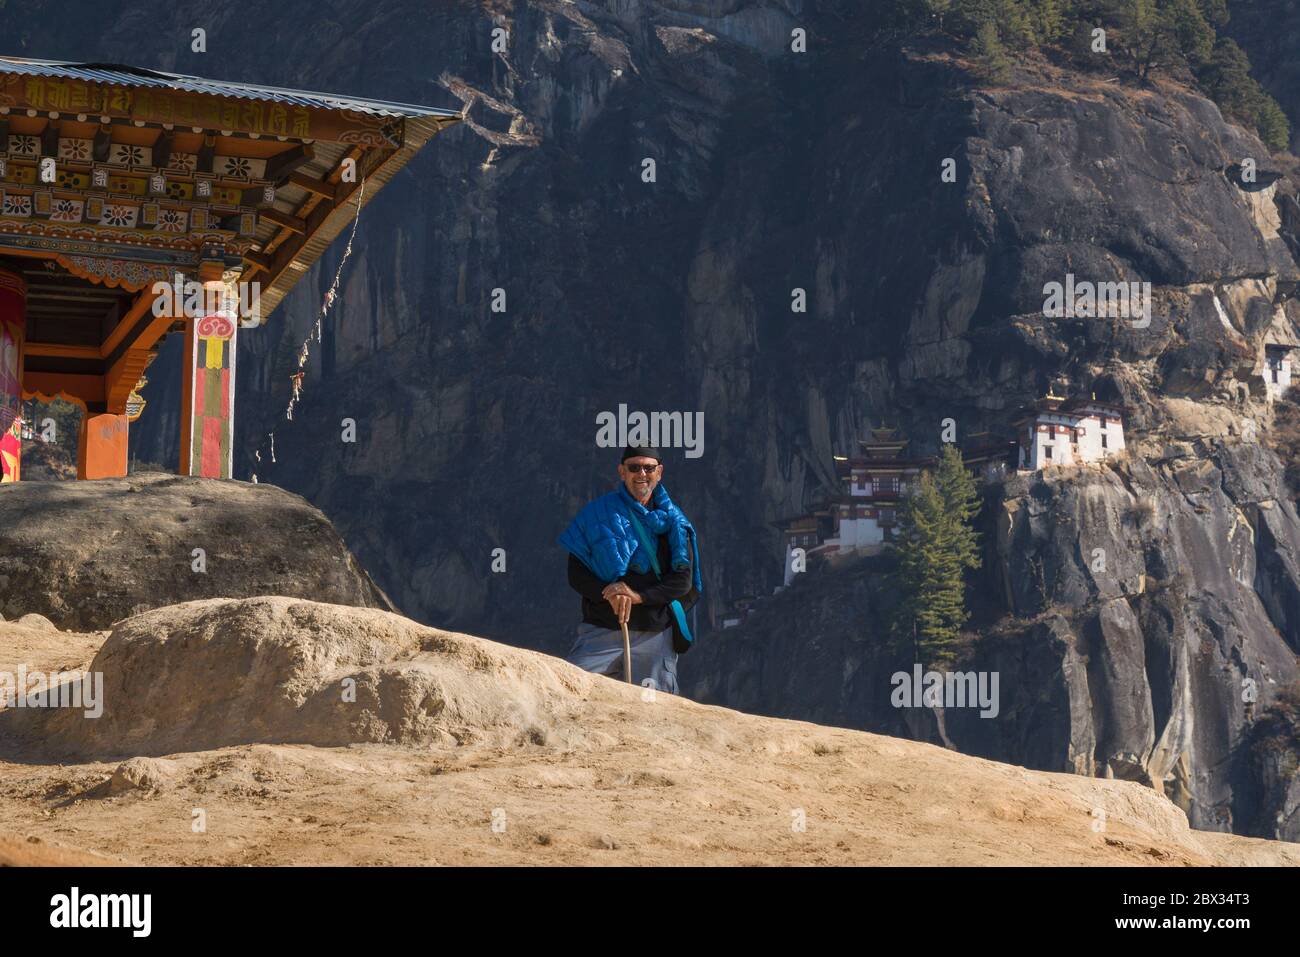 Hiker (model released) on way to Tiger’s Nest Monastery in Bhutan pauses for self-portrait. Stock Photo